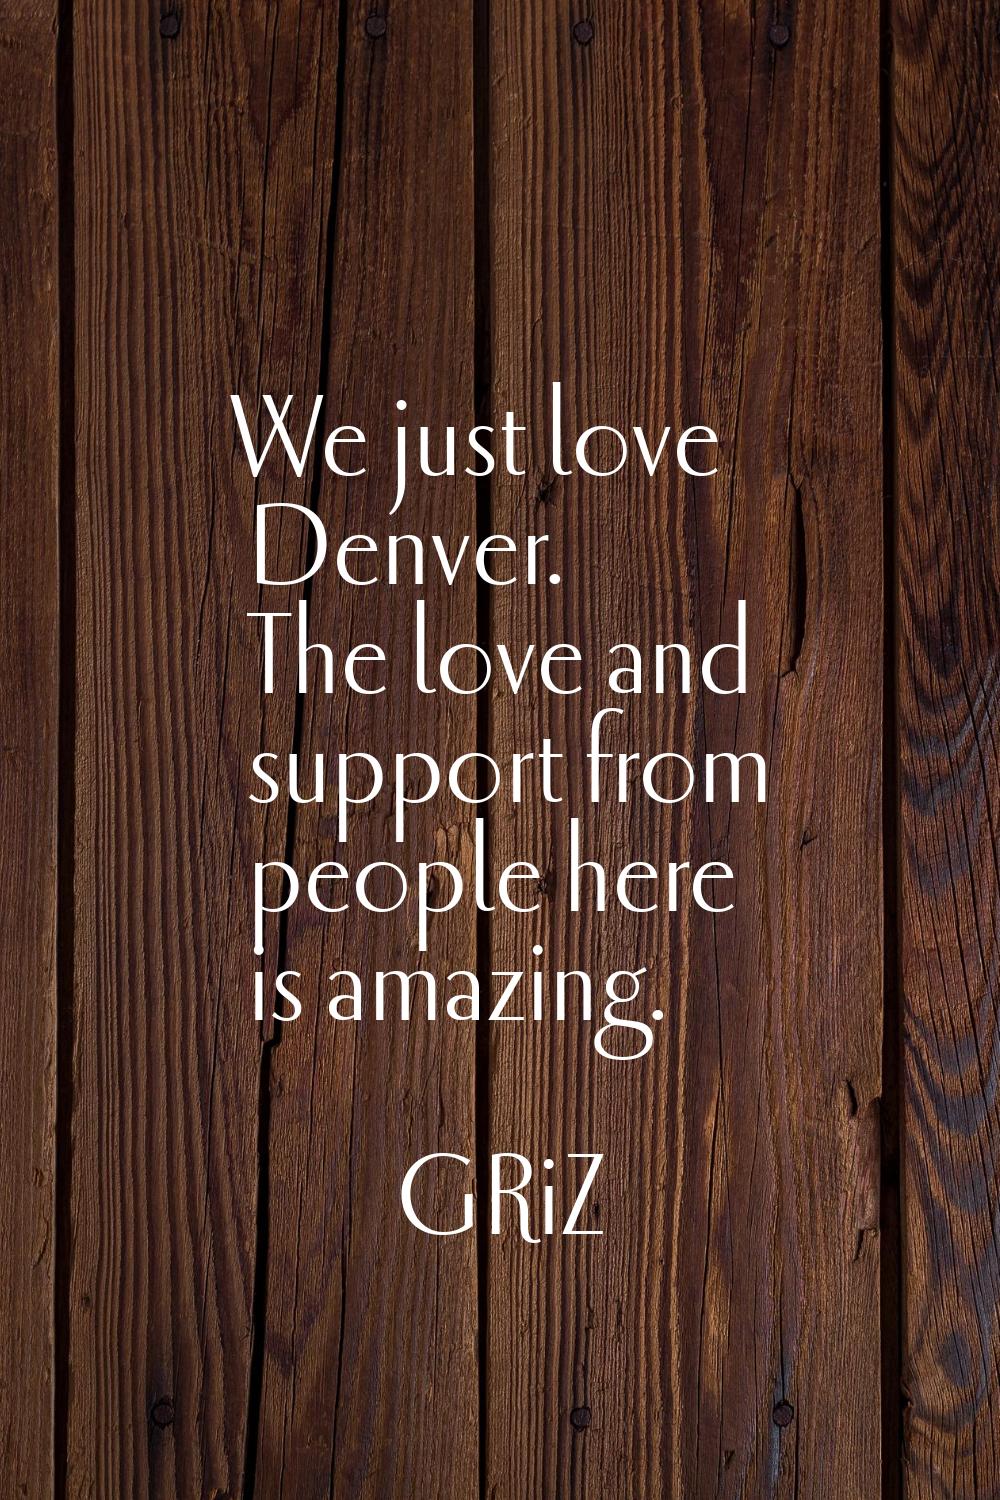 We just love Denver. The love and support from people here is amazing.